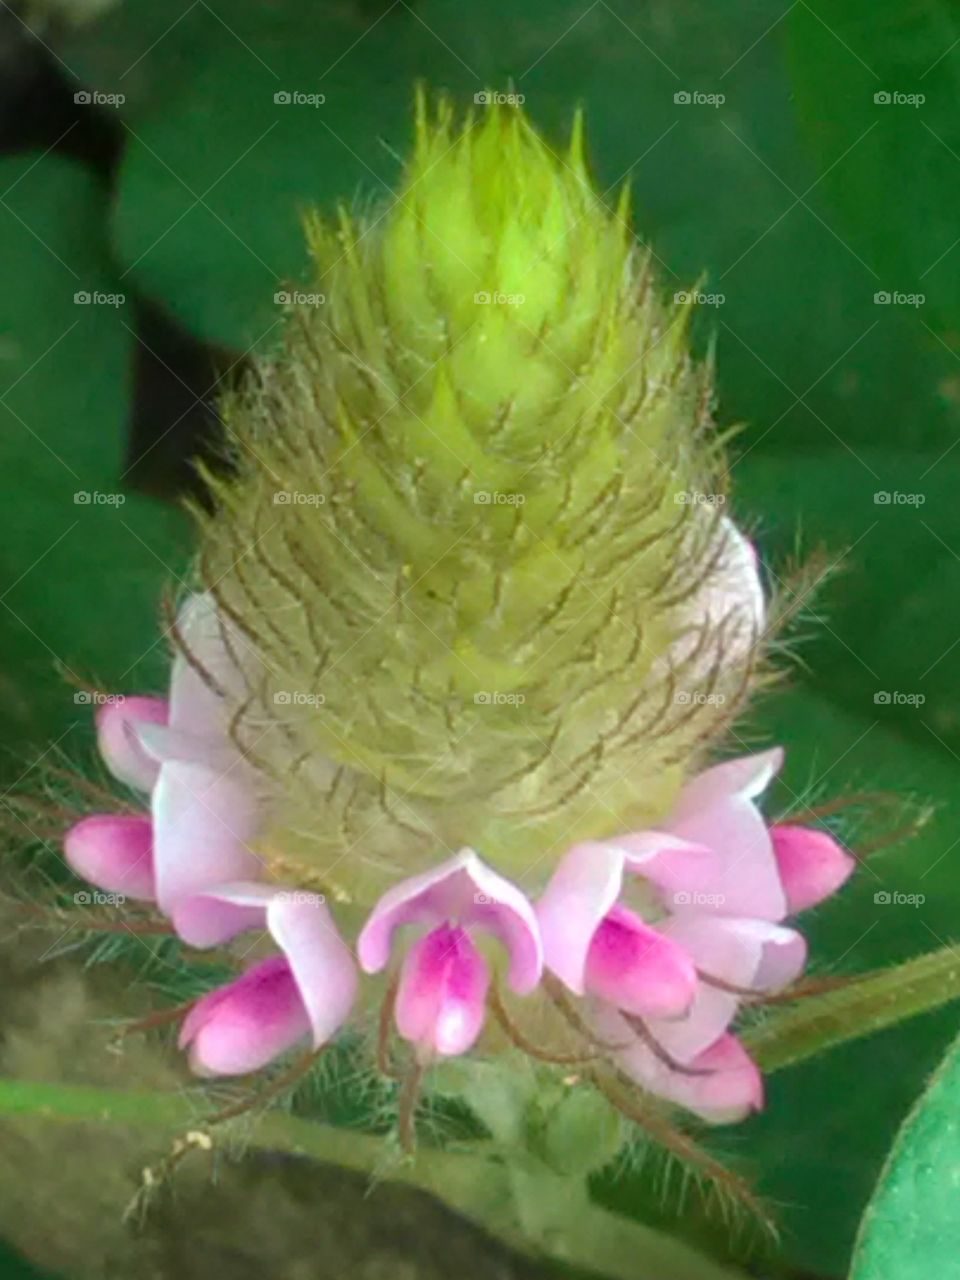 The pink flower blossoms around and the pyramid of its bees beans in between.